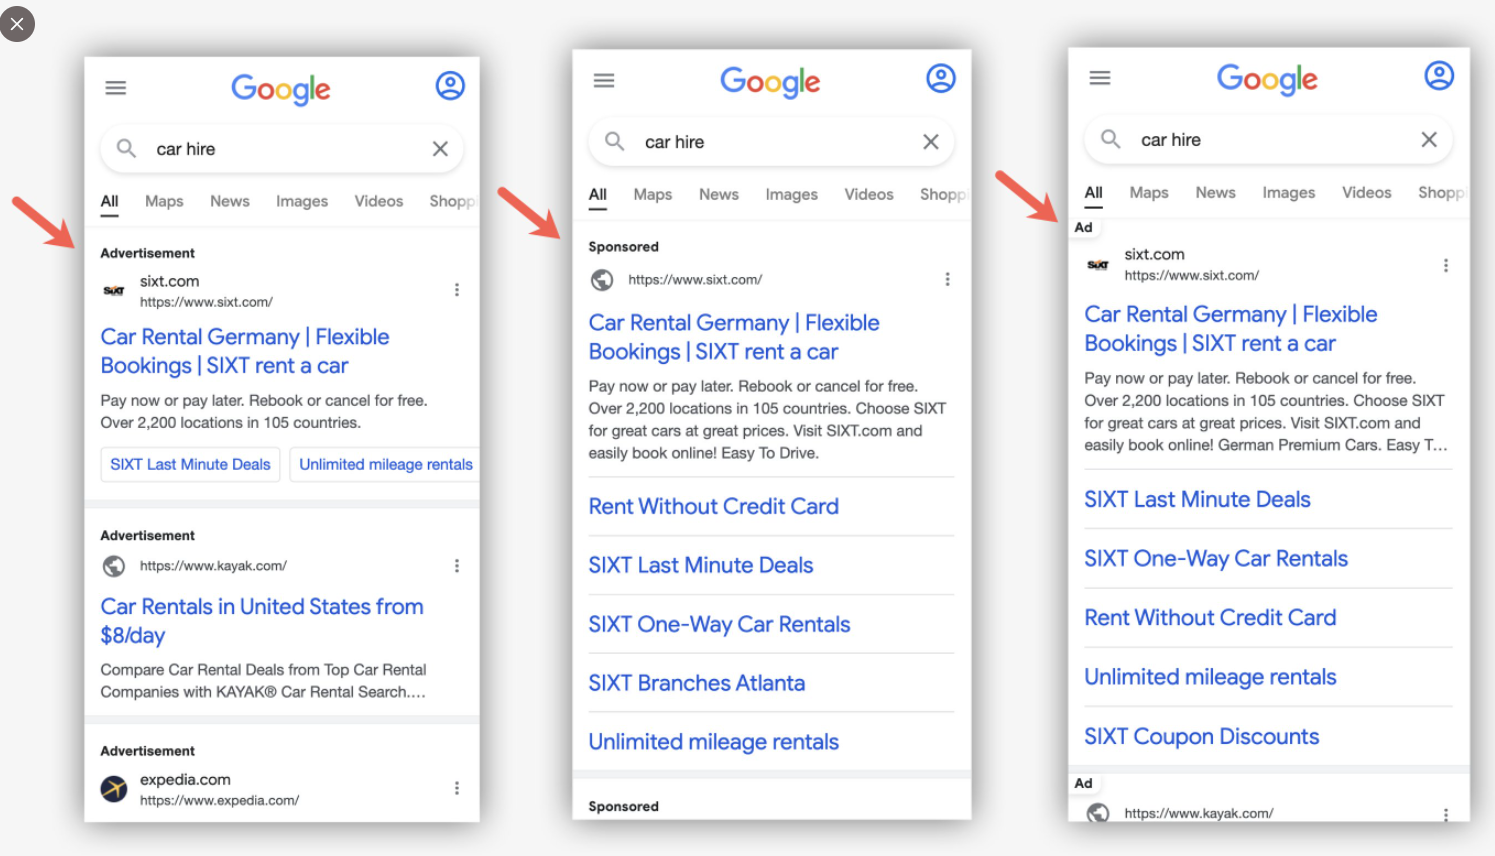 Google Tests New ad label variations on mobile with advertisement / sponsored label instead of Ads